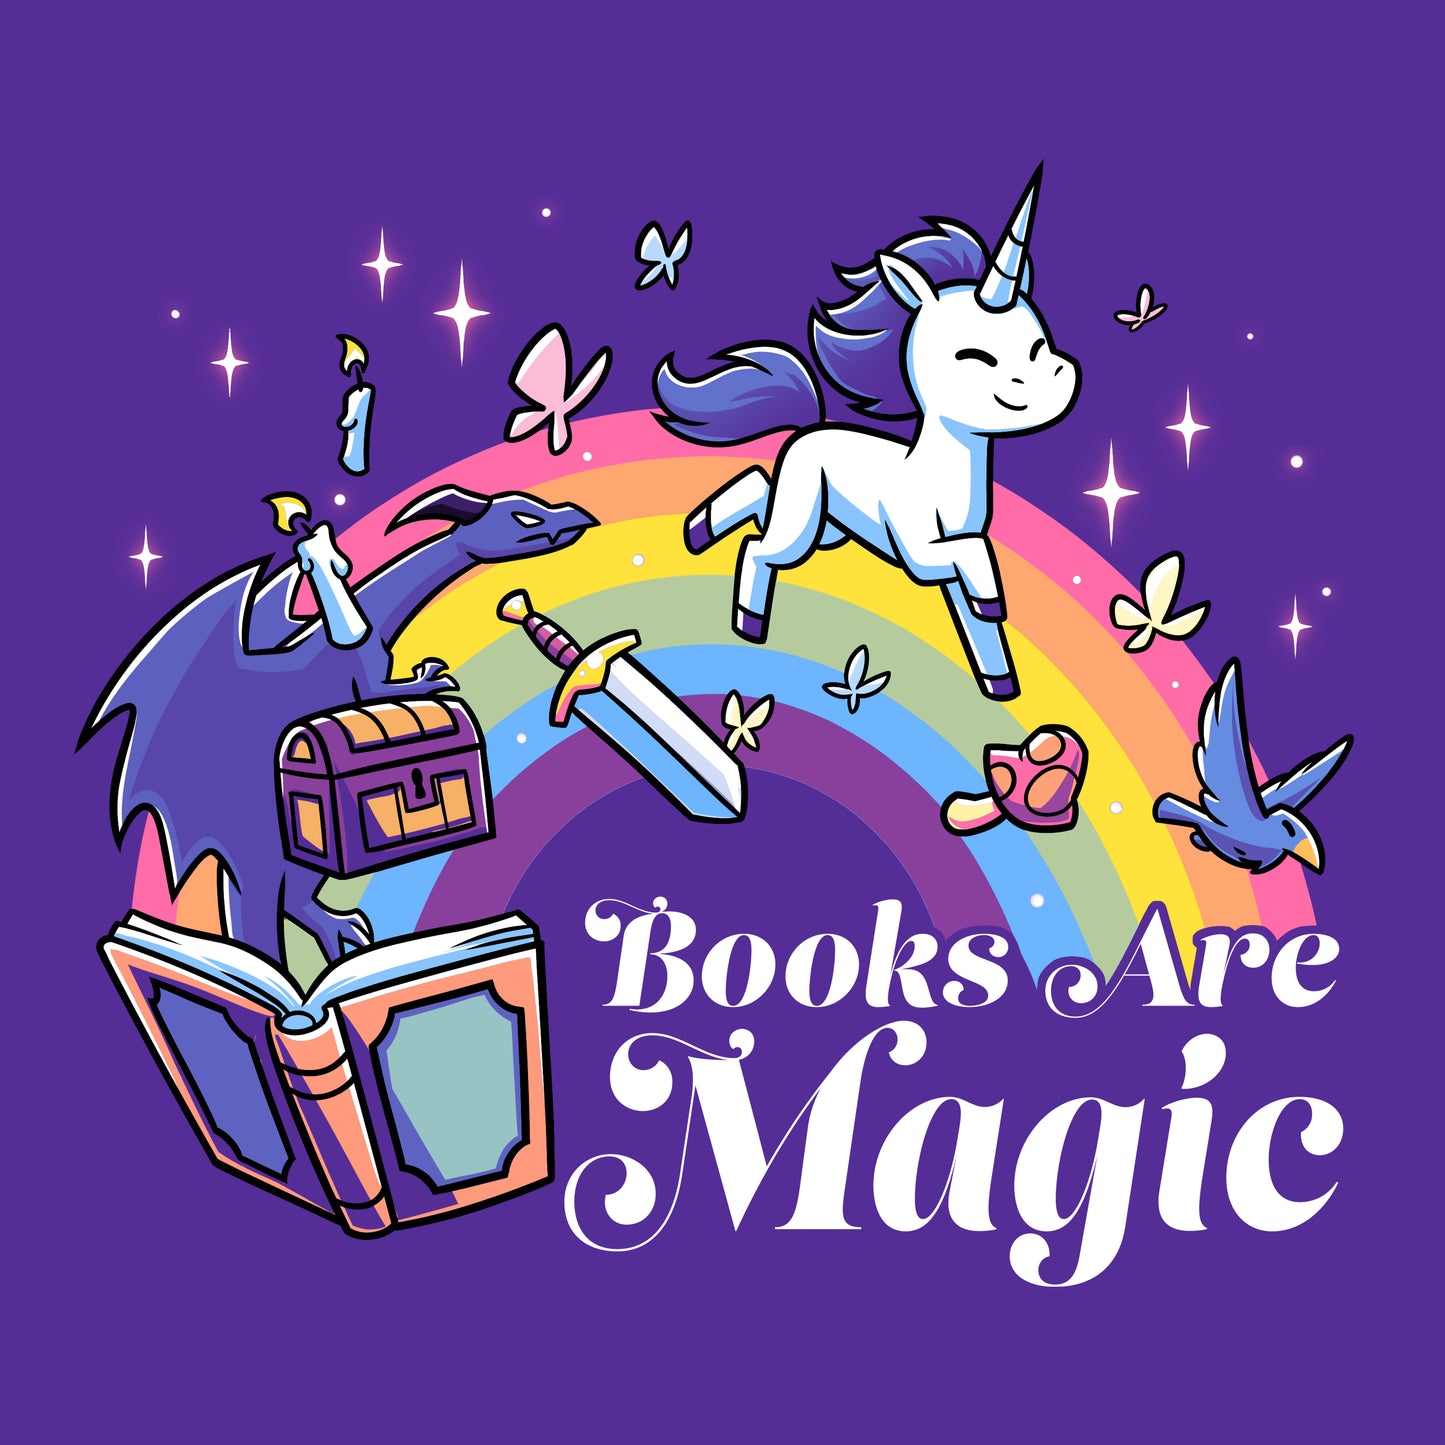 Illustration of a flying unicorn, open book, rainbow, treasure chest, sword, and birds. Sparkles and the text "Books Are Magic" appear on a purple background. Perfect for a Books Are Magic t-shirt by monsterdigital in Super Soft Ringspun Cotton.